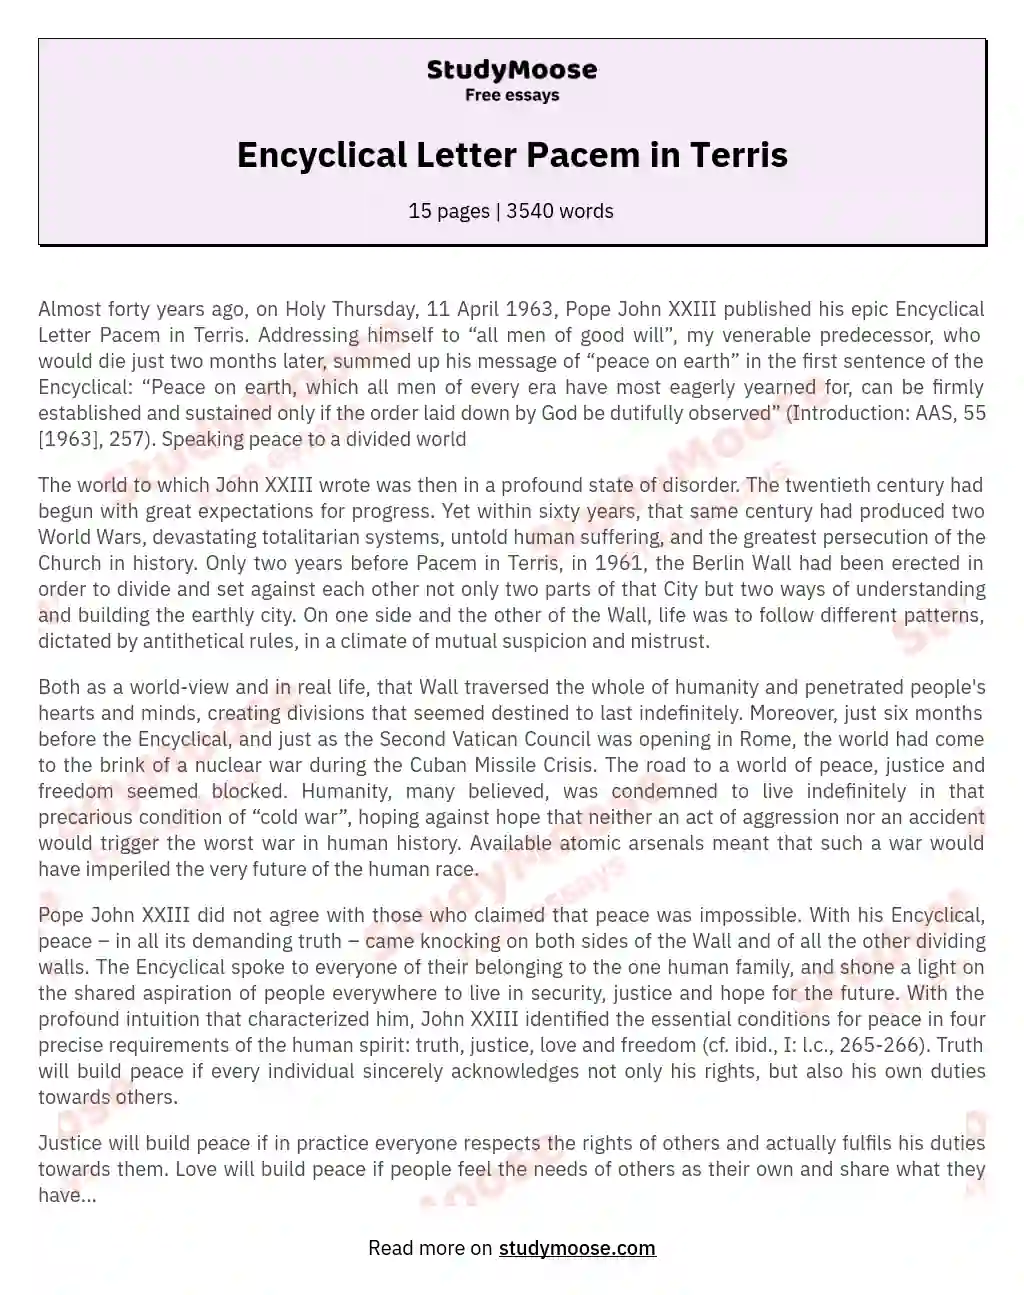 Encyclical Letter Pacem in Terris essay